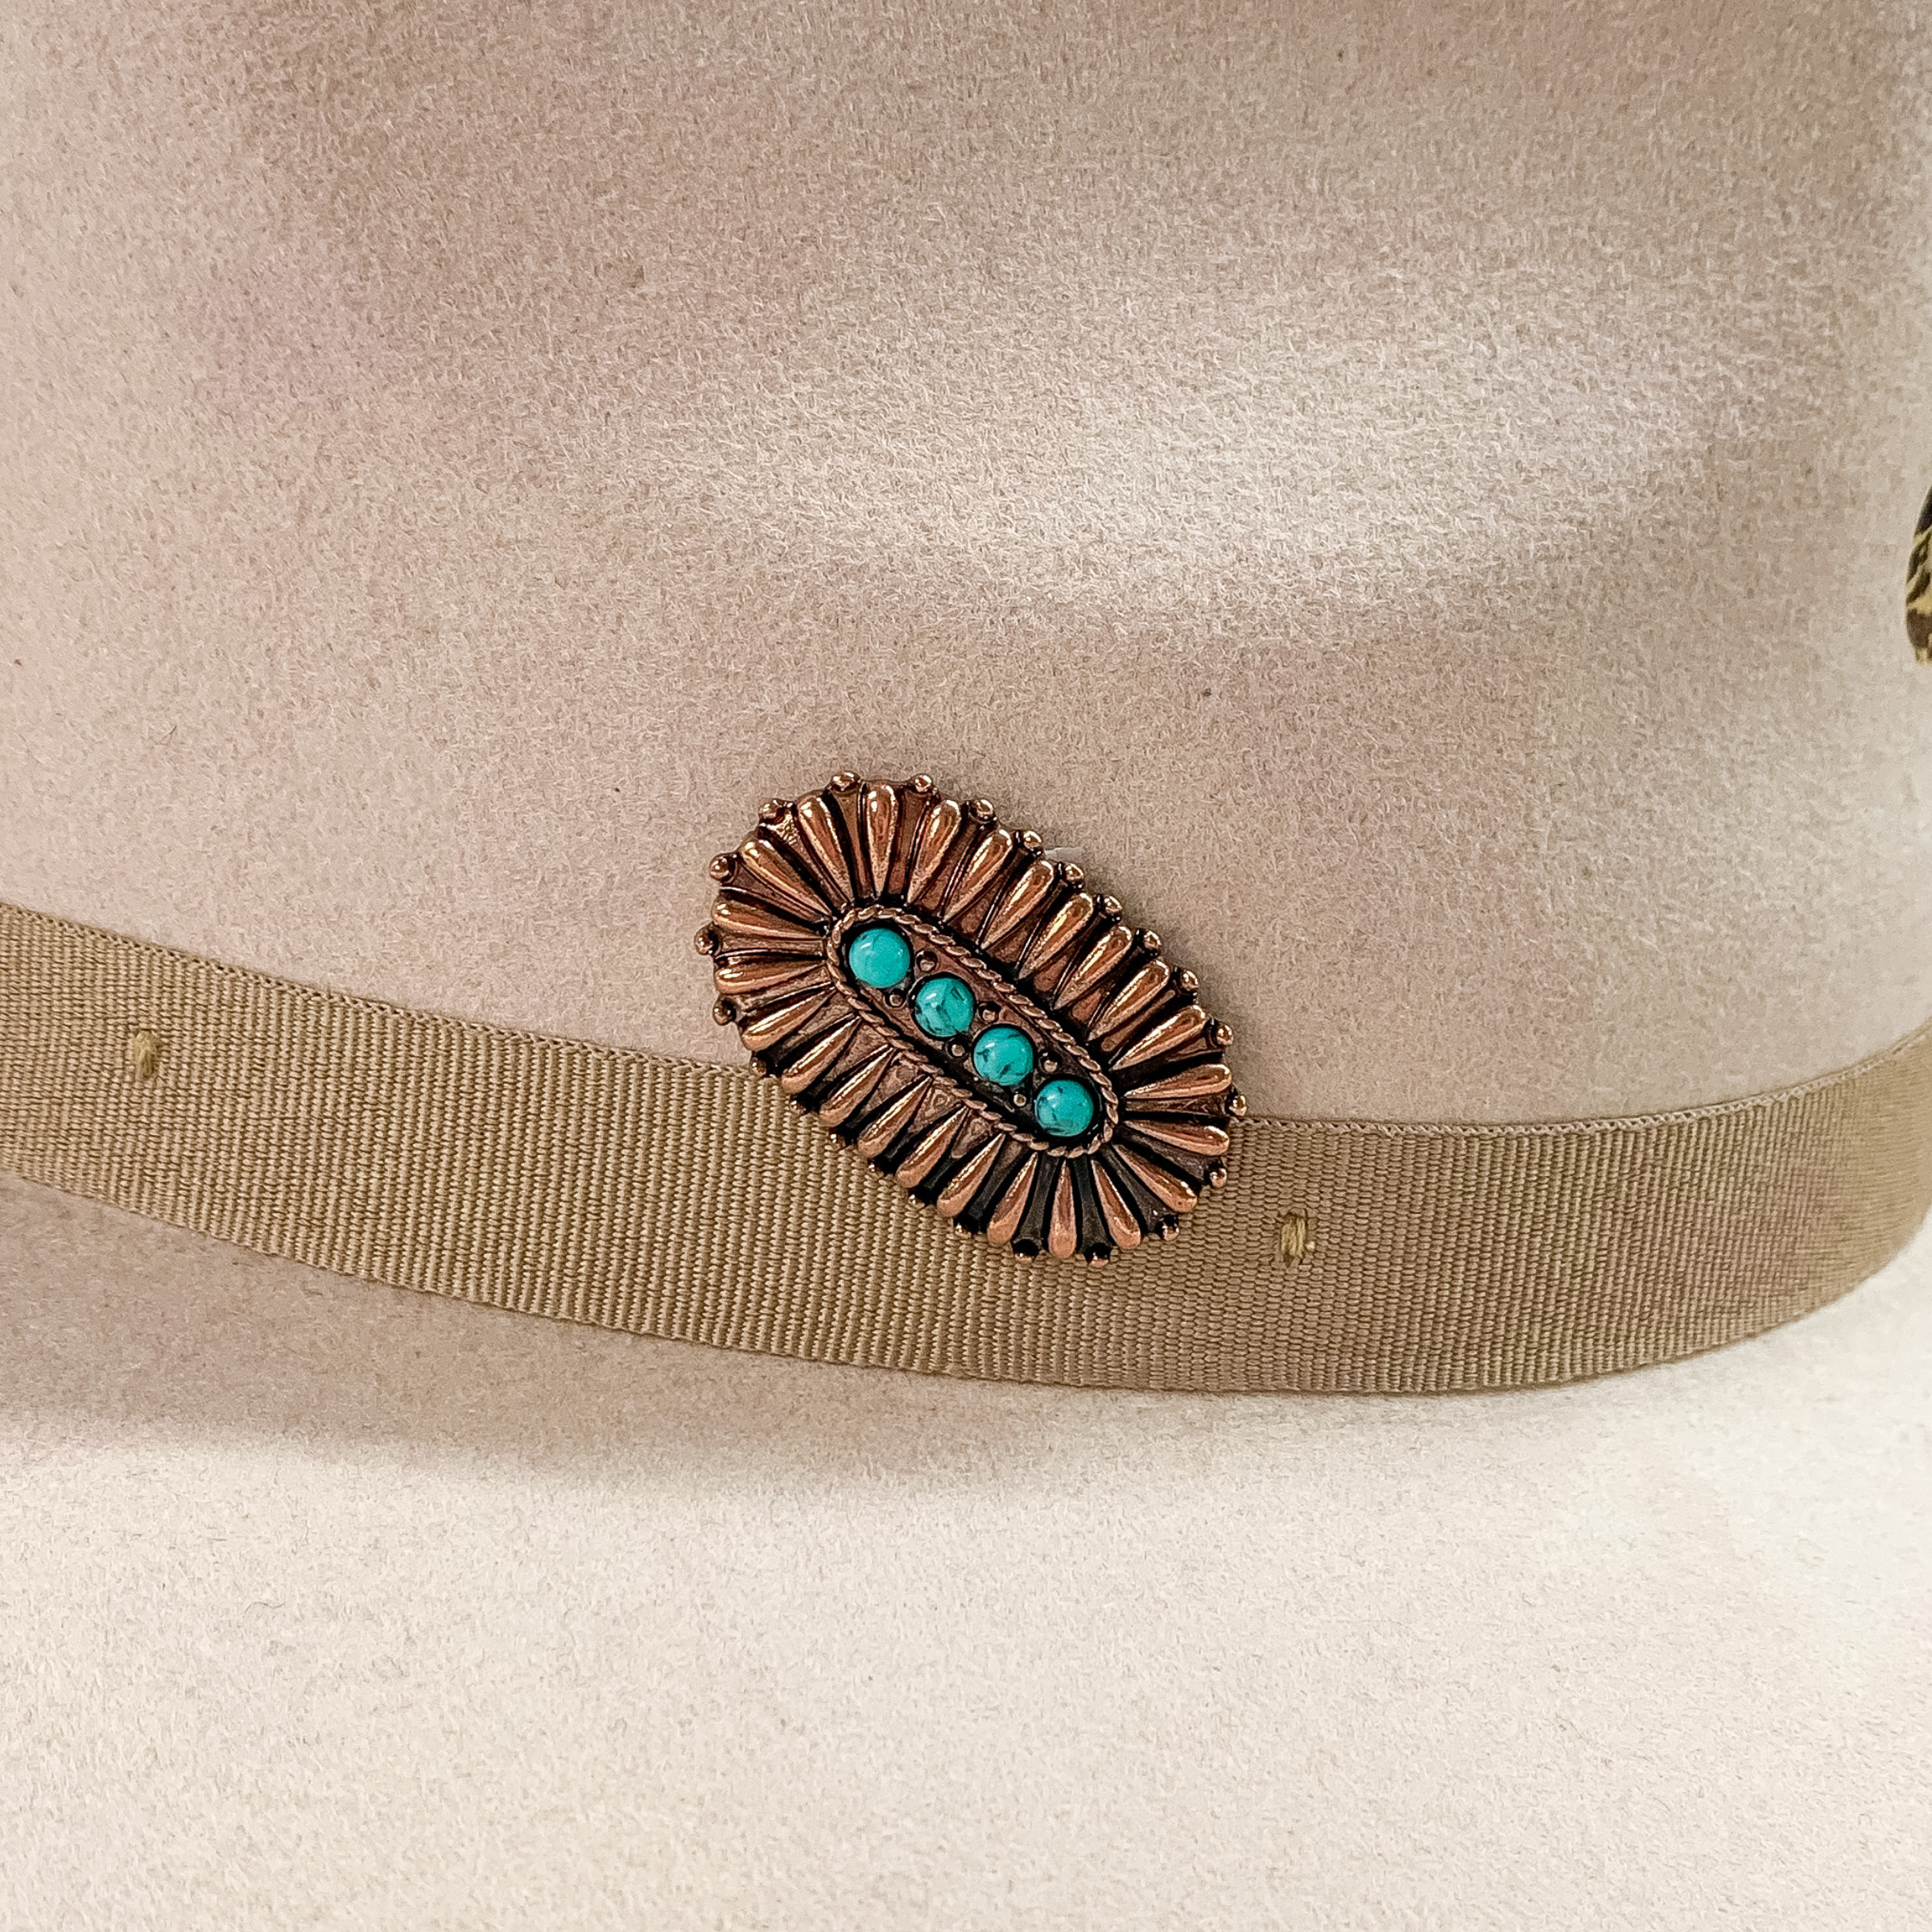 Oval Concho Hat Pin with Four Turquoise Stones in Copper Tone - Giddy Up Glamour Boutique